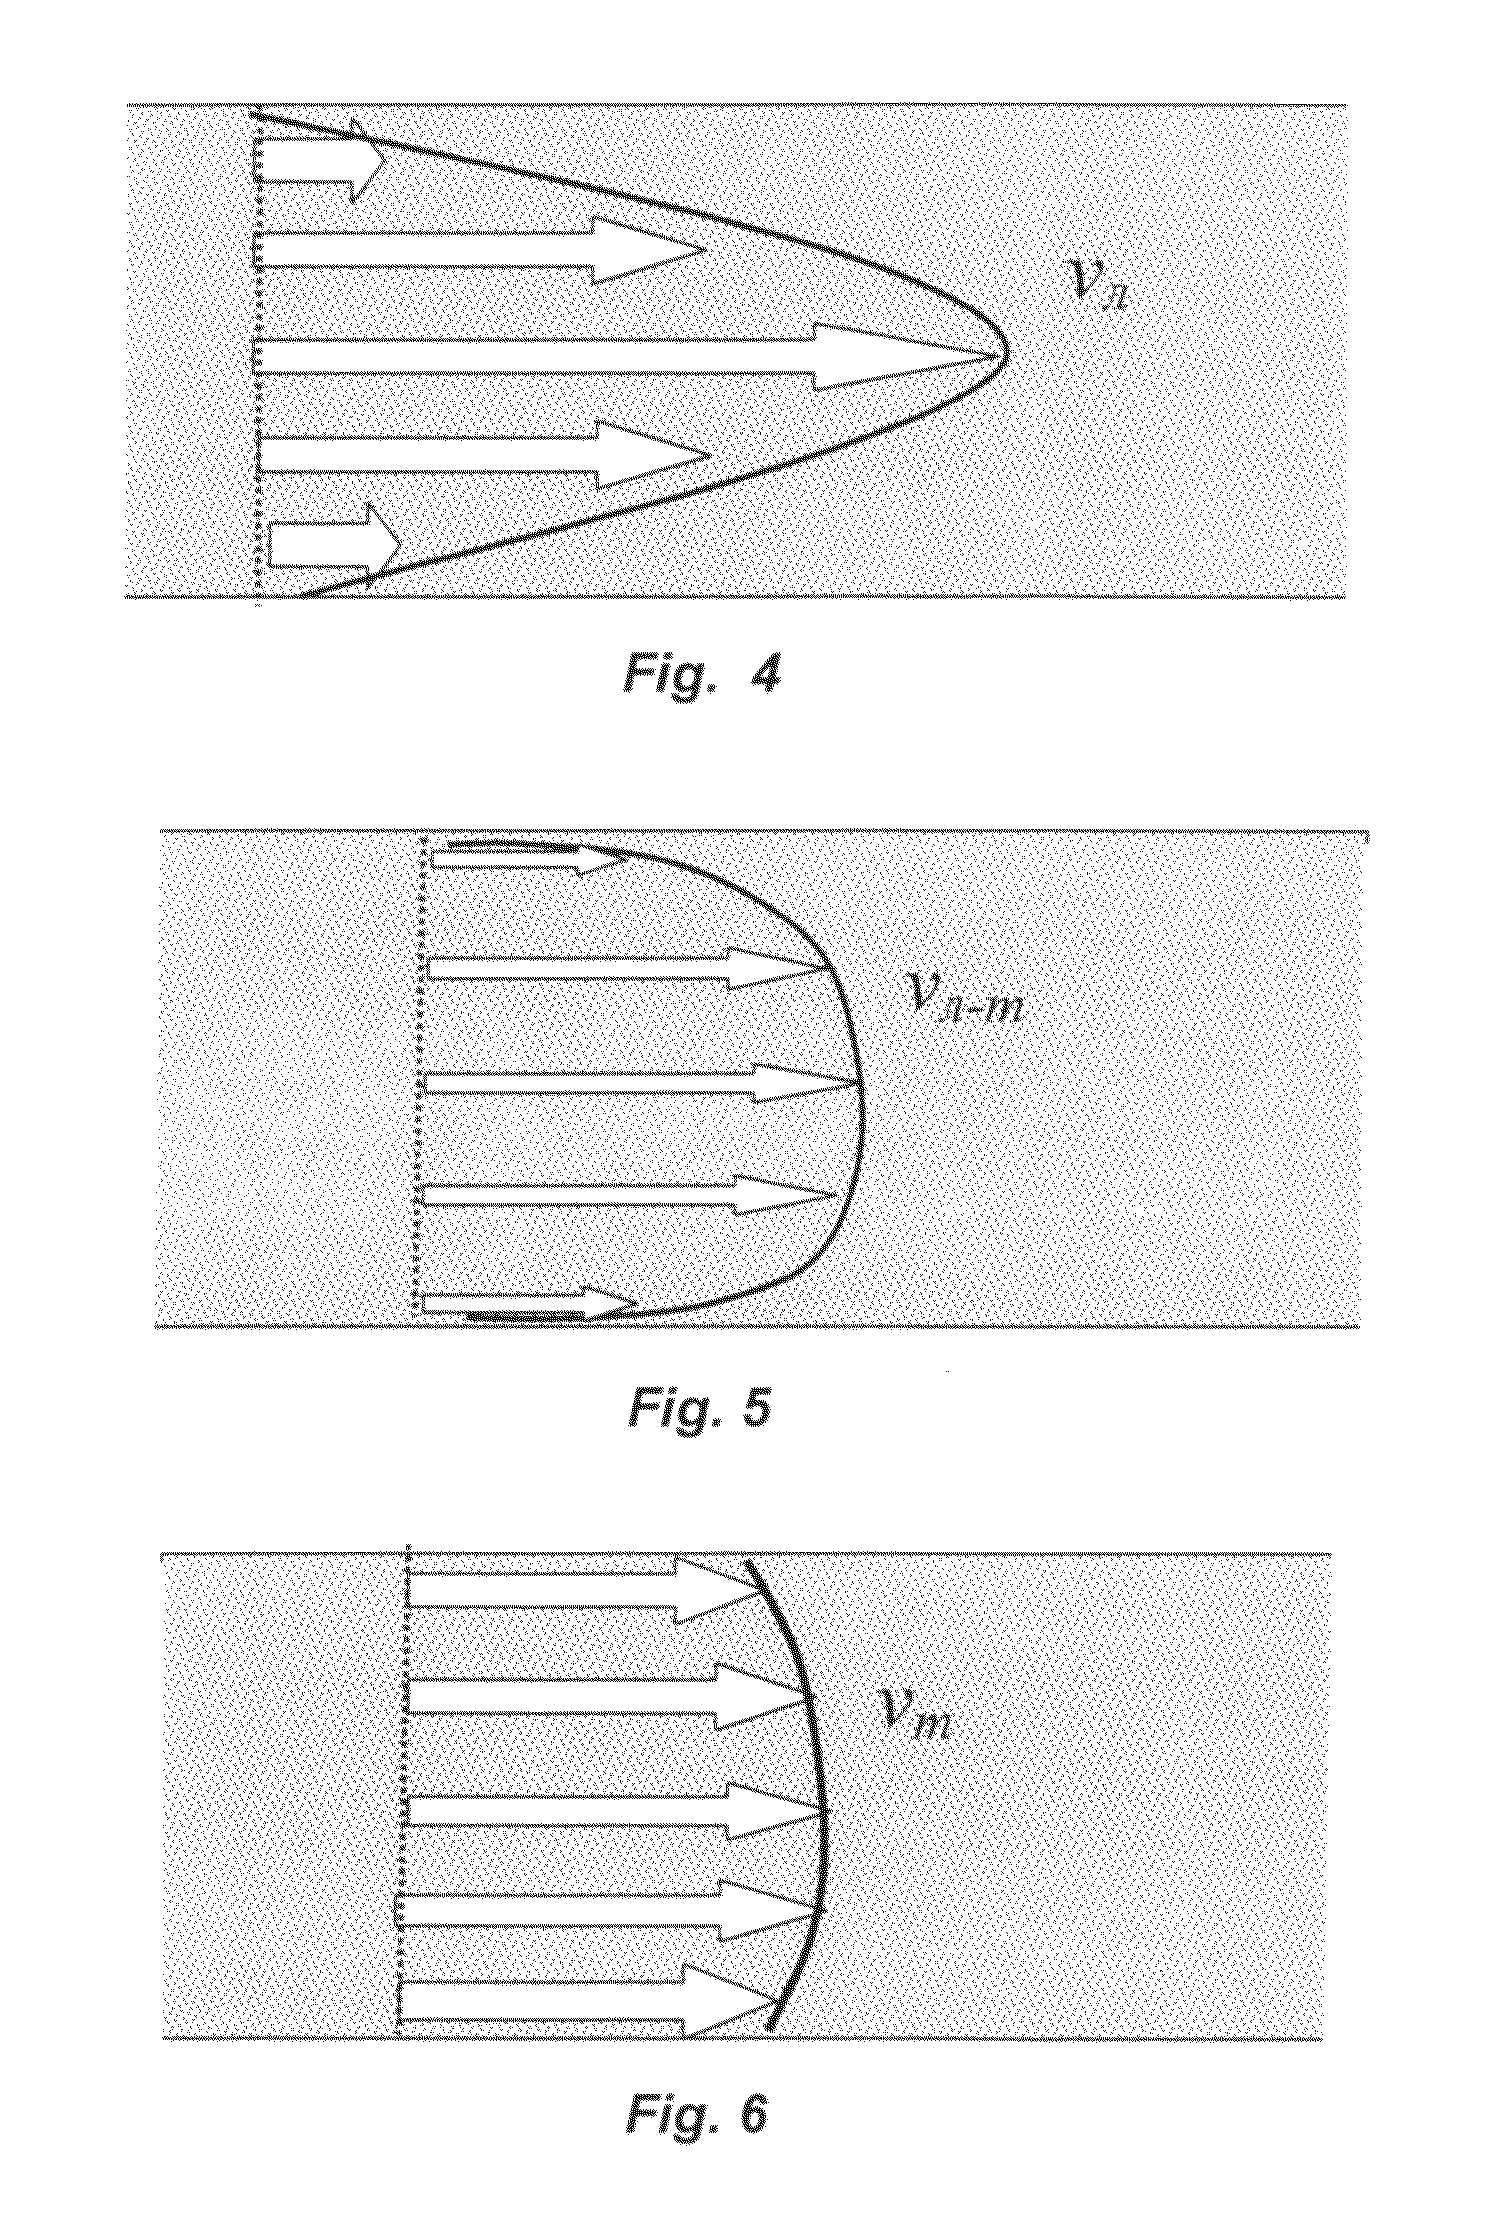 Method and apparatus for preparing and inertial placing with compacting a concrete mix